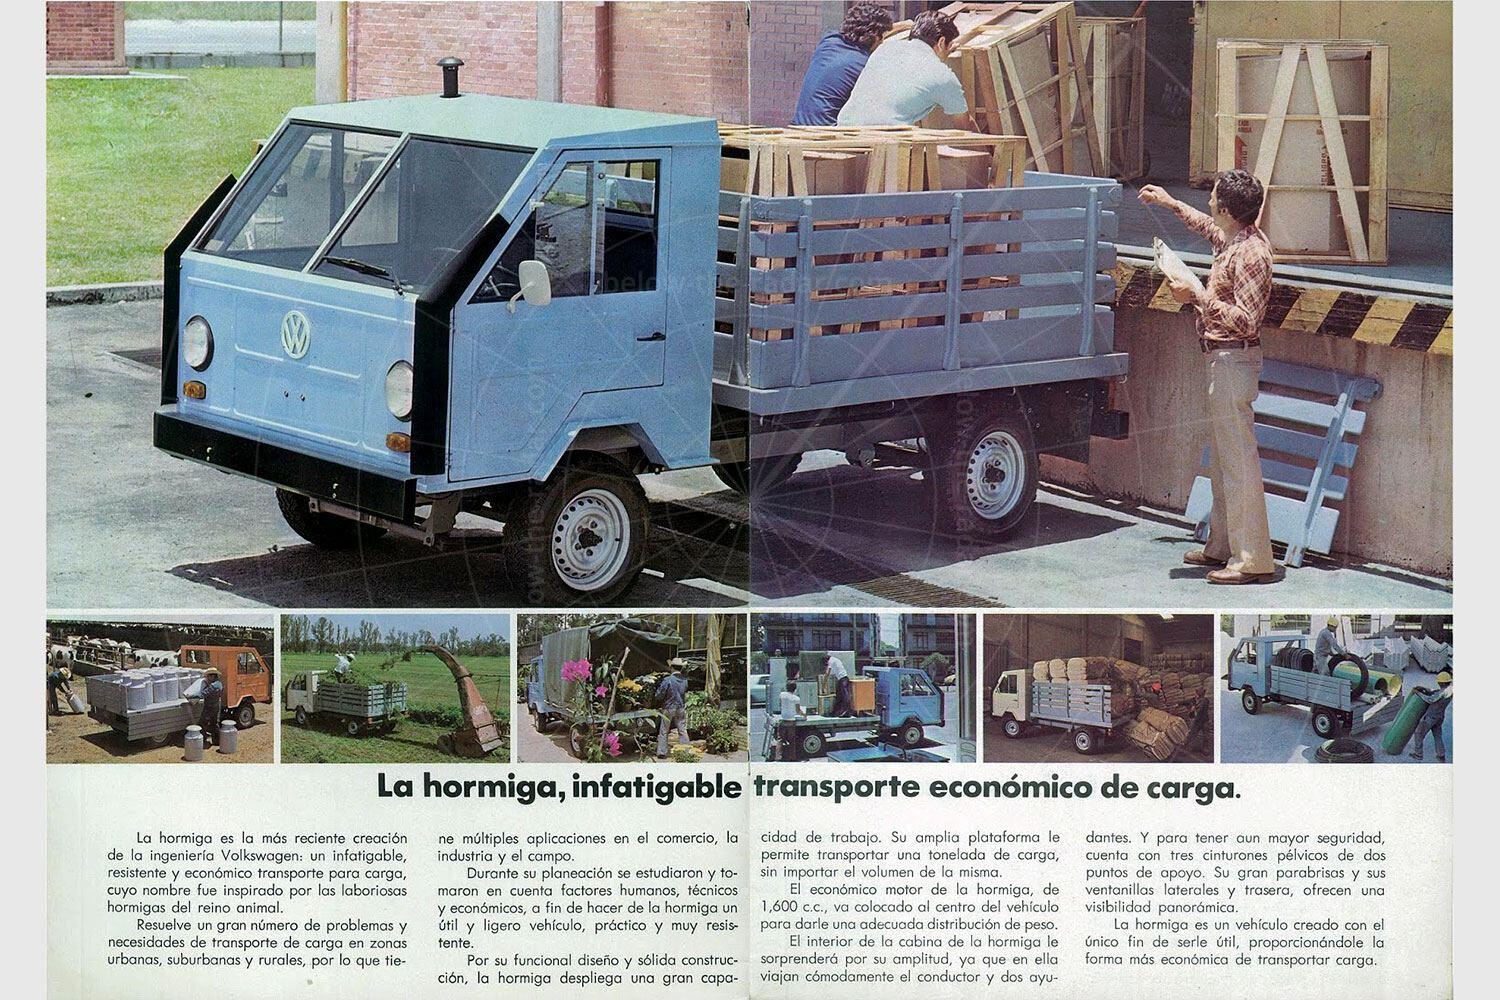 A Mexican Volkswagen Hormiga. There’s no grille, which strikes us as a rather dangerous move for a vehicle that relies on air for its engine cooling Pic: Volkswagen | A Mexican Volkswagen Hormiga. There’s no grille, which strikes us as a rather dangerous move for a vehicle that relies on air for its engine cooling